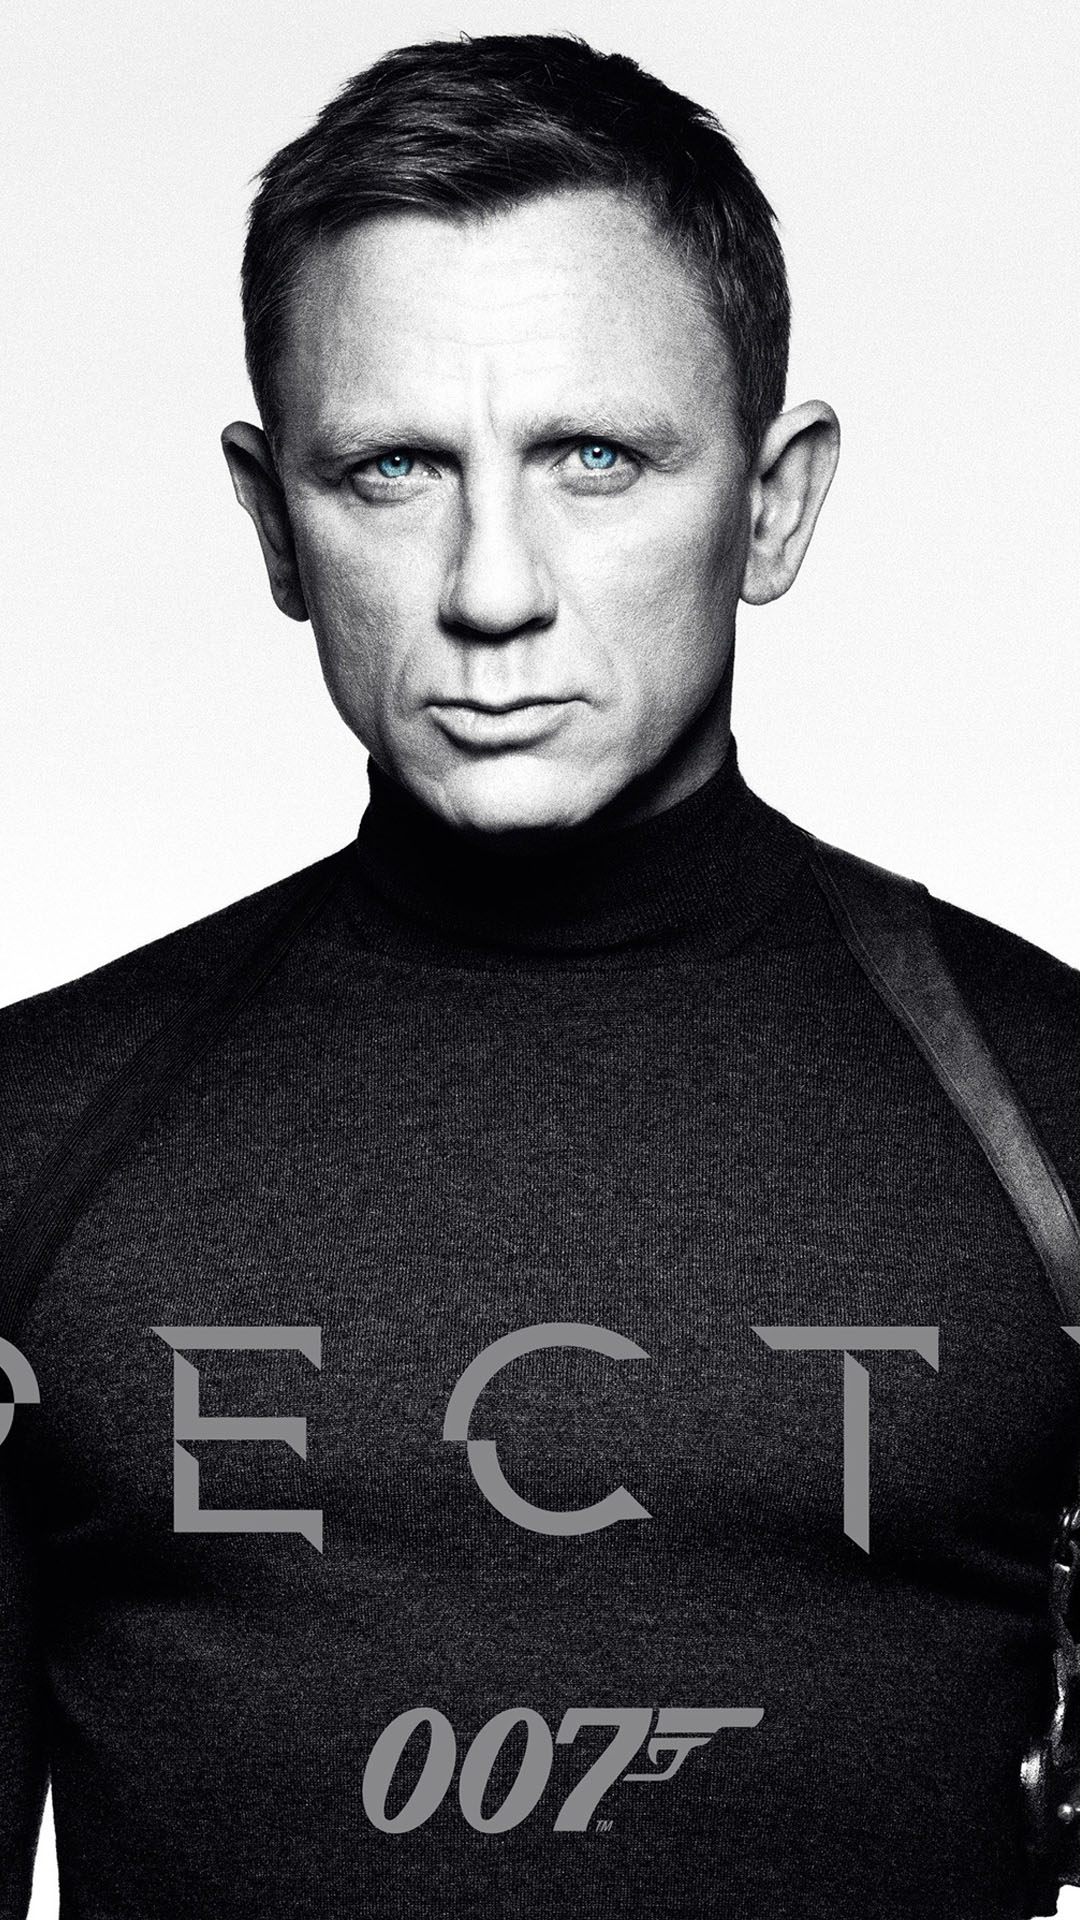 007 spectre watch movie hd online from a trusted sites